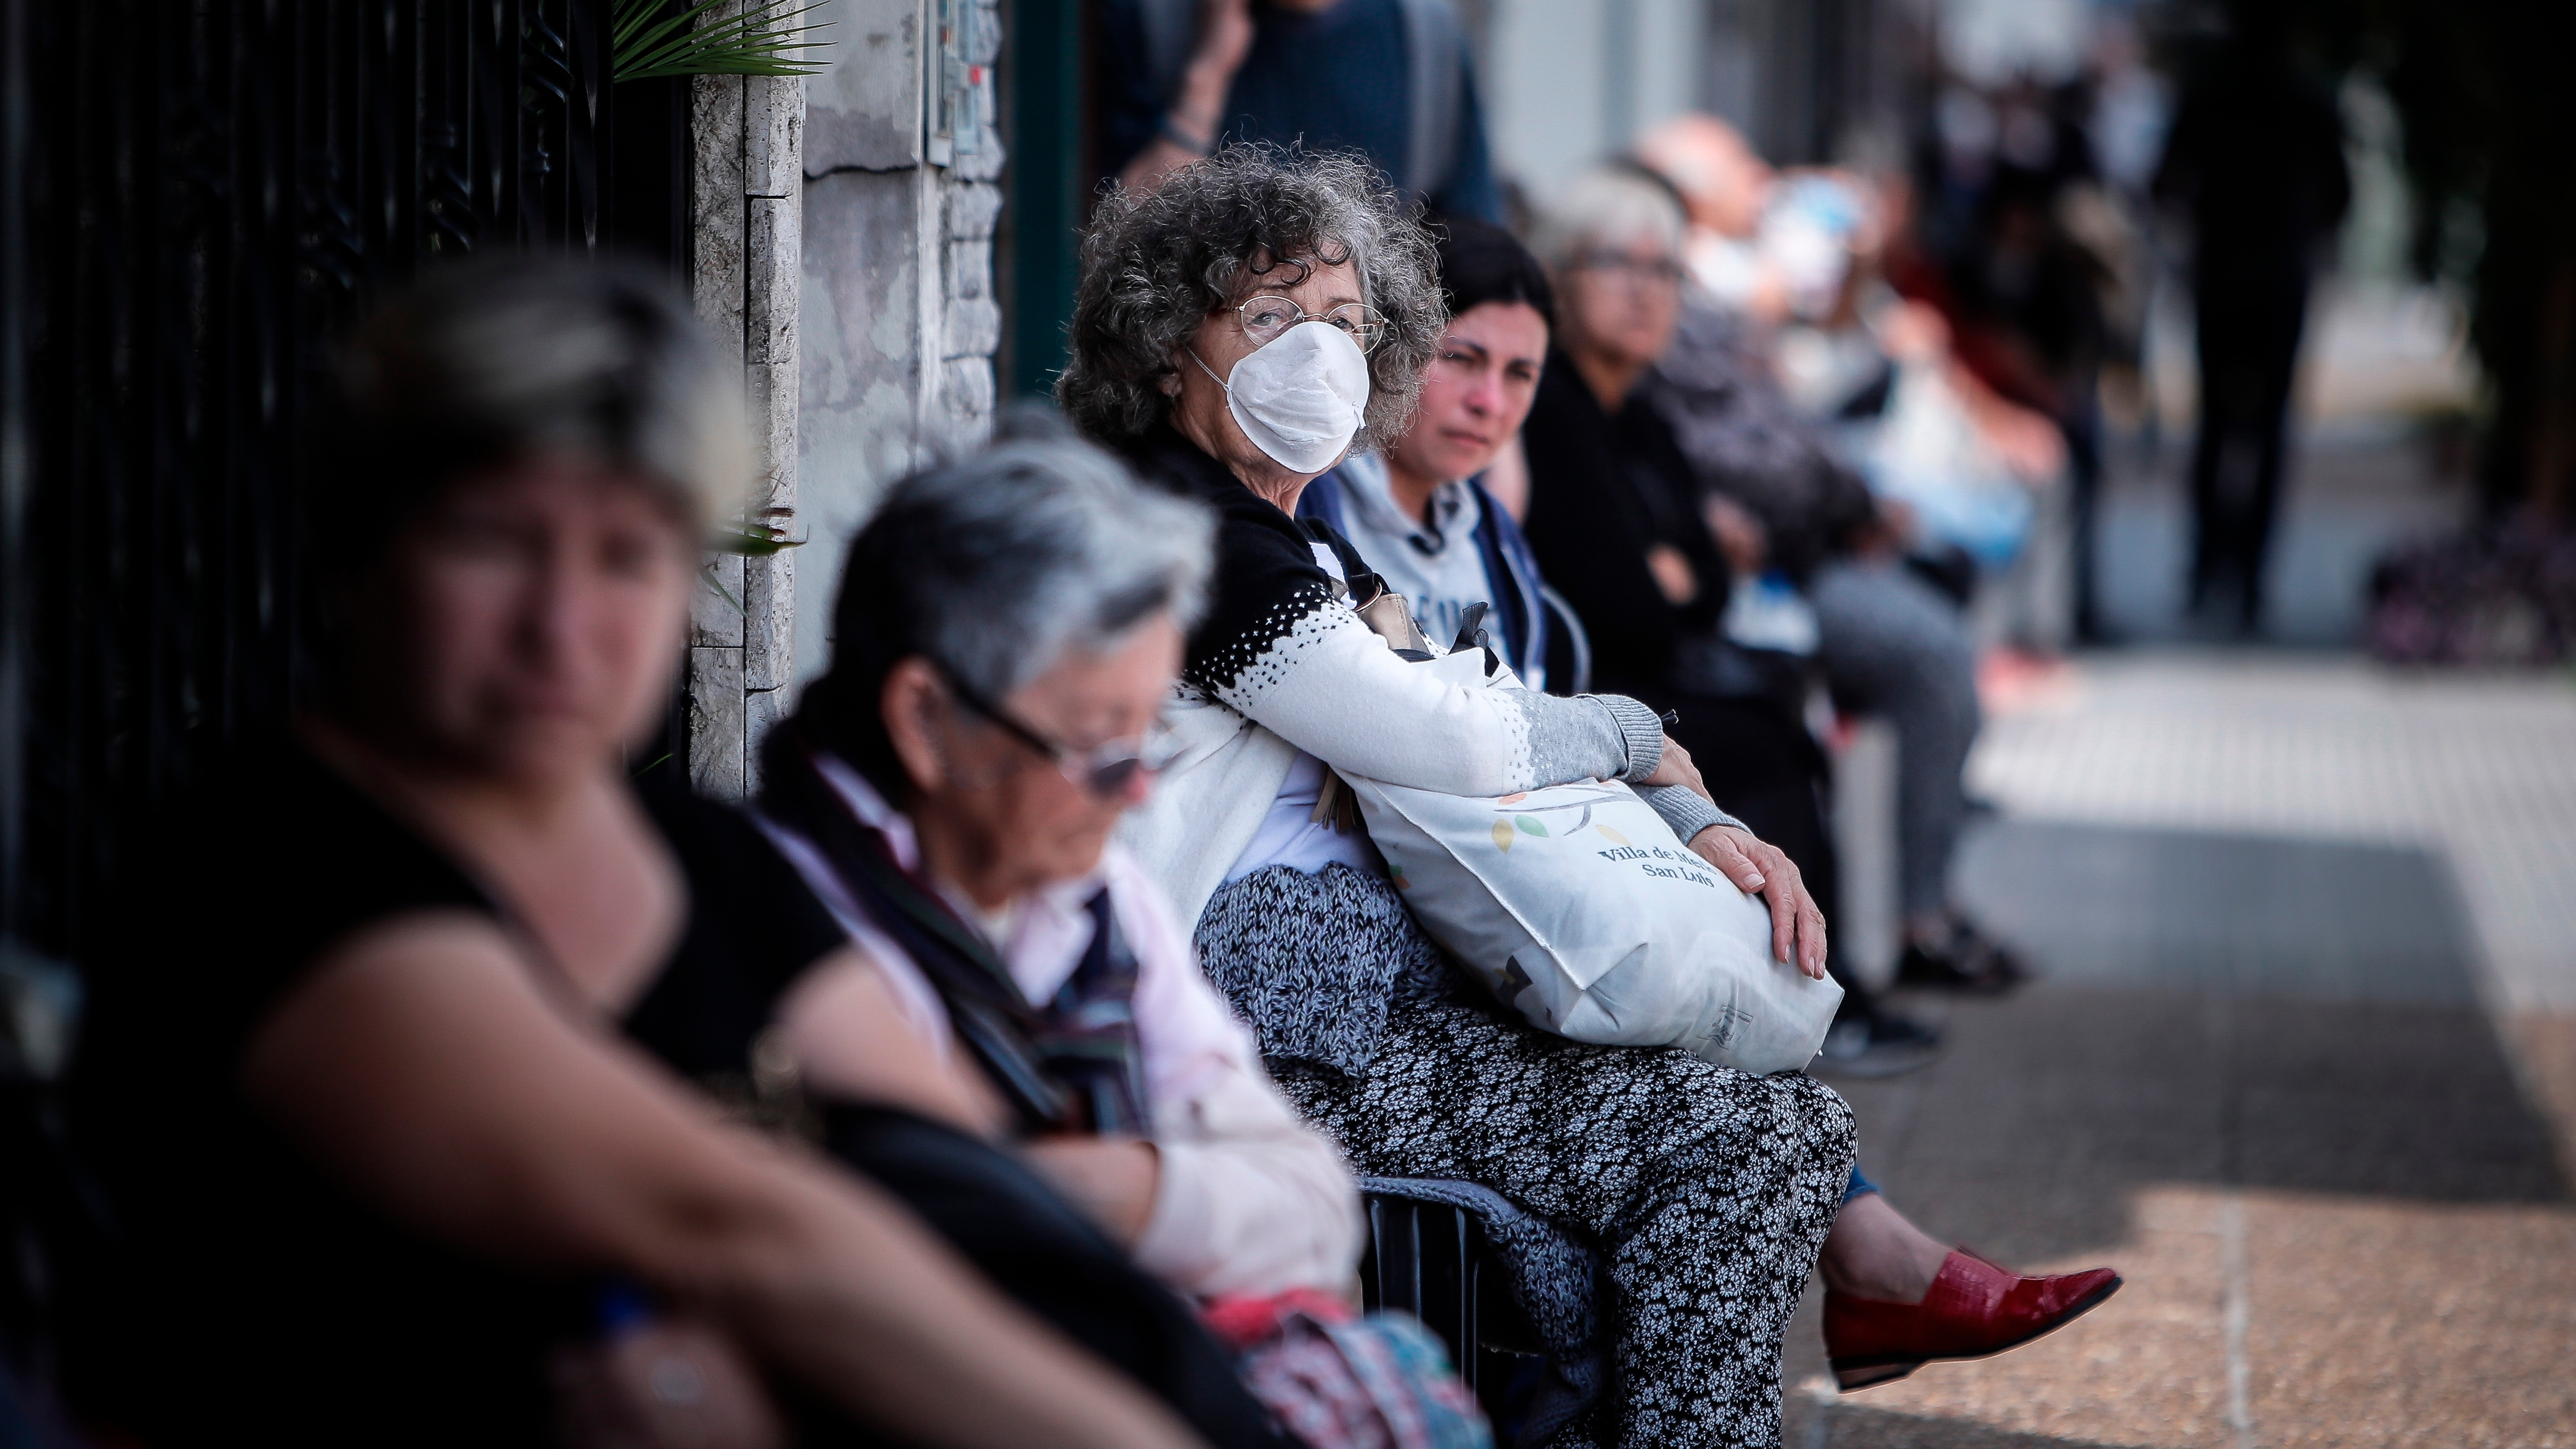 Older adults have been one of the groups most affected by COVID (EFE/Juan Ignacio Roncoroni)